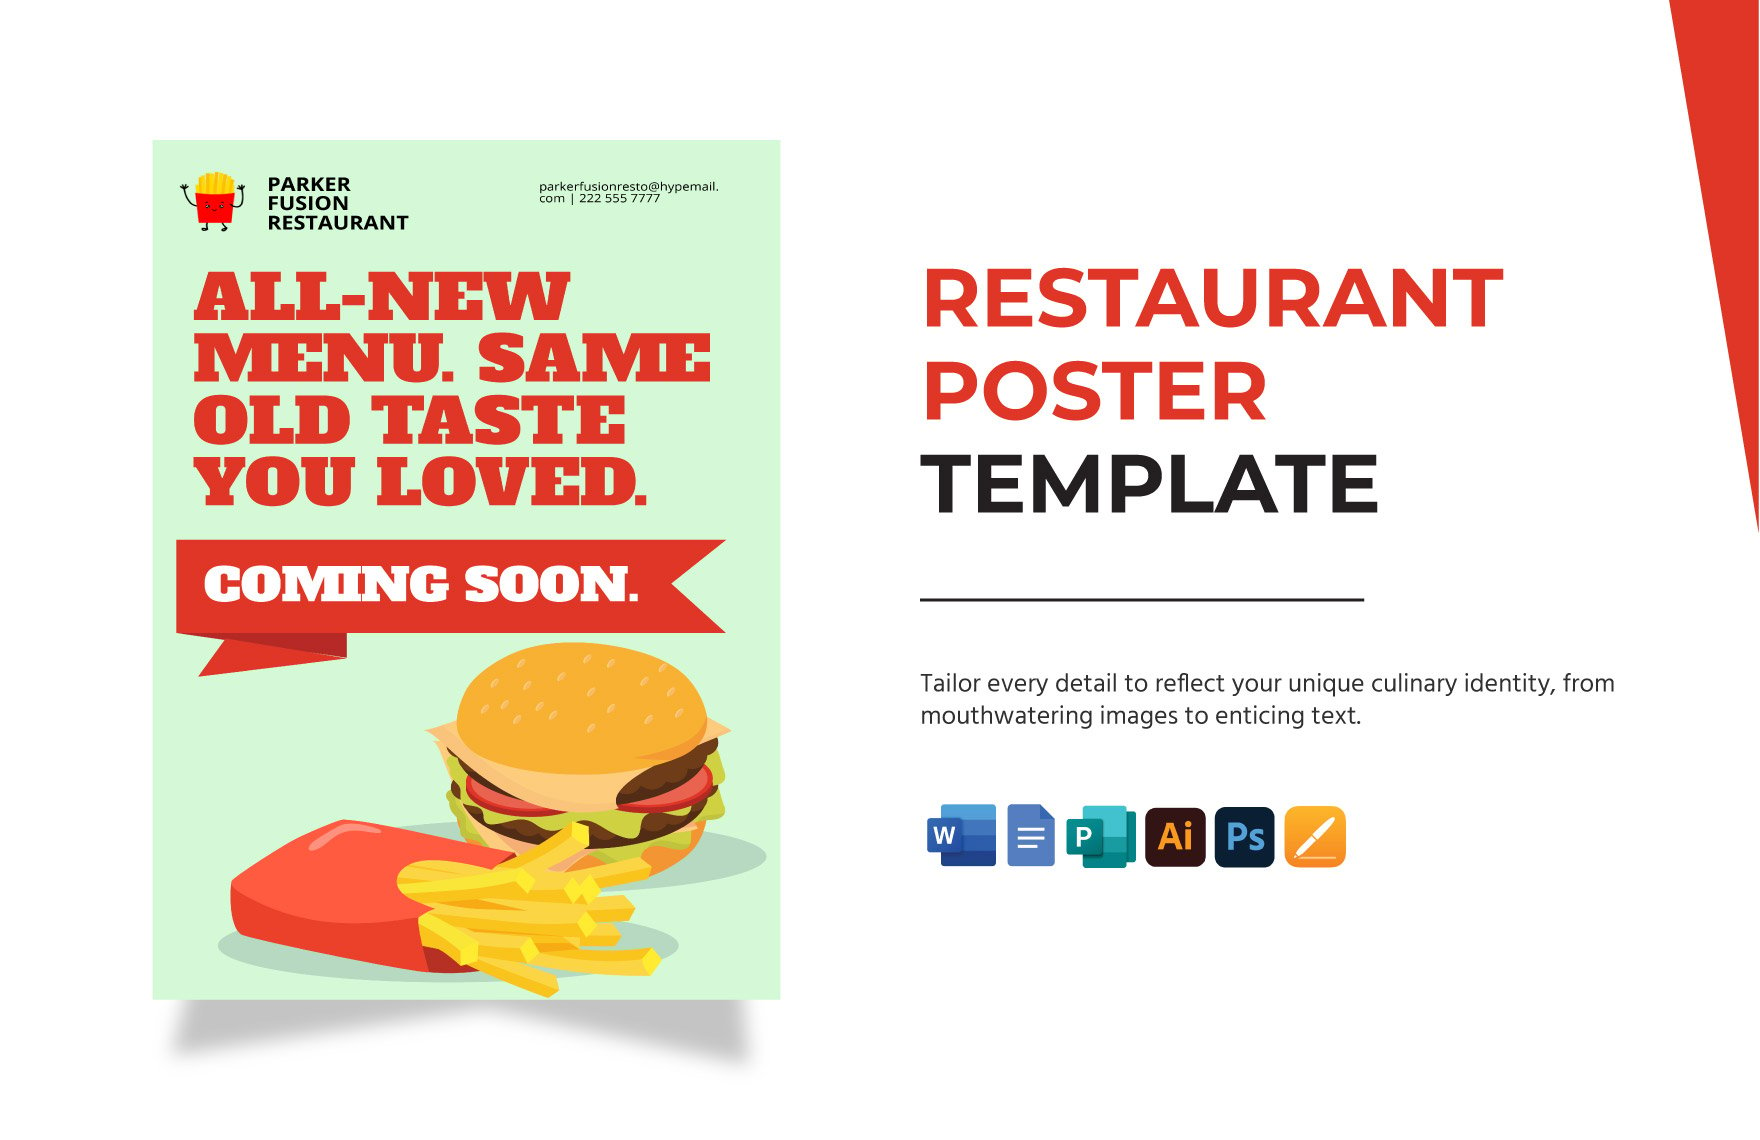 Restaurant Coming Soon Poster